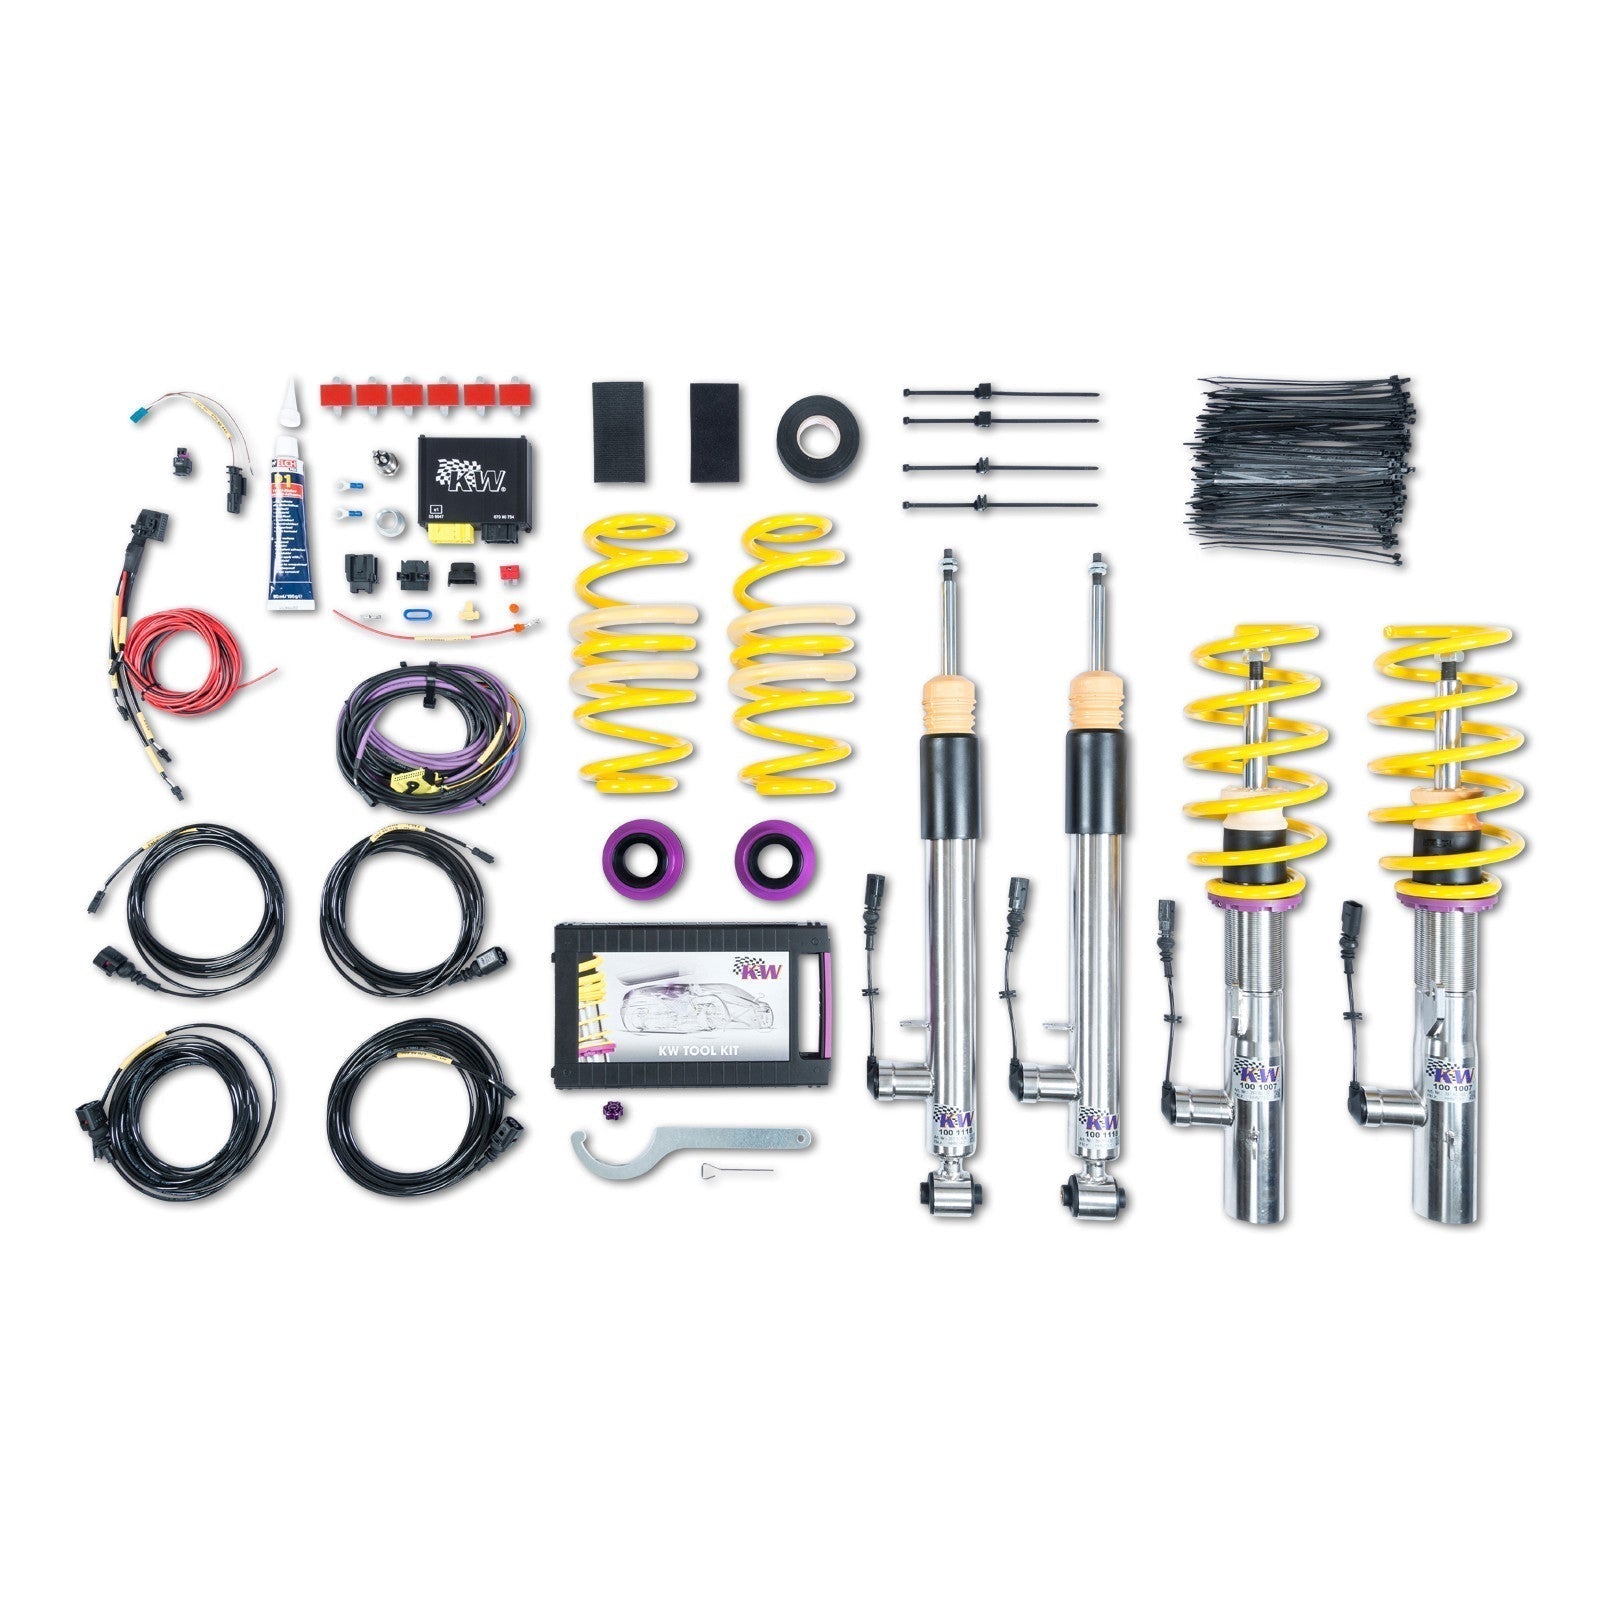 KW DCC ECU Coilover Kit - MK6 Golf R without DCC